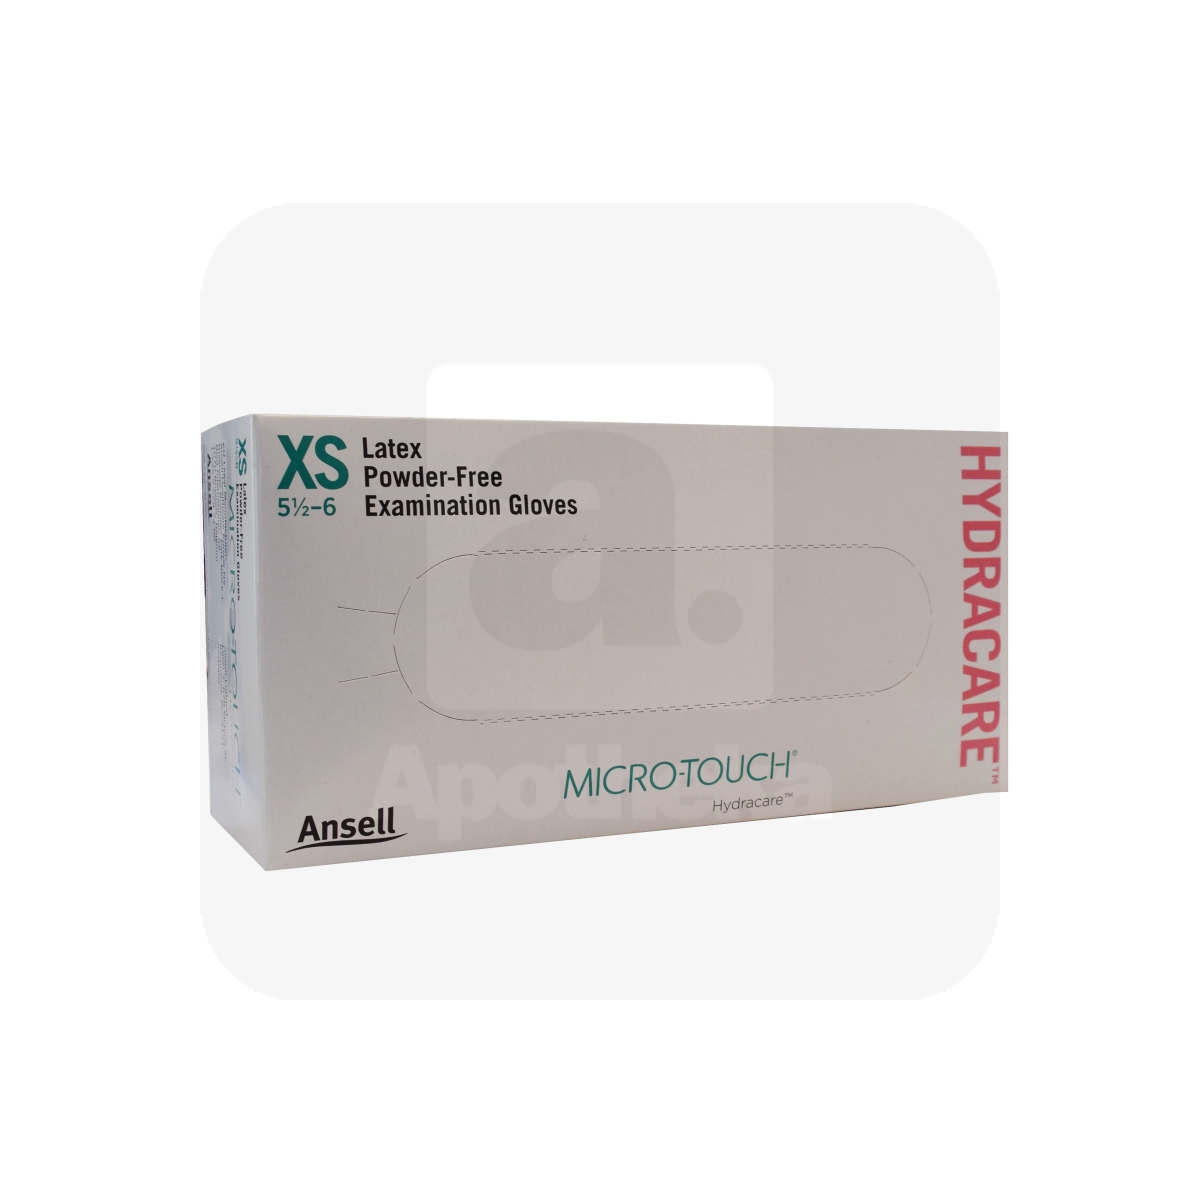 KINDAD MICRO-TOUCH HYDRACARE PF PROT LATEX XS N100